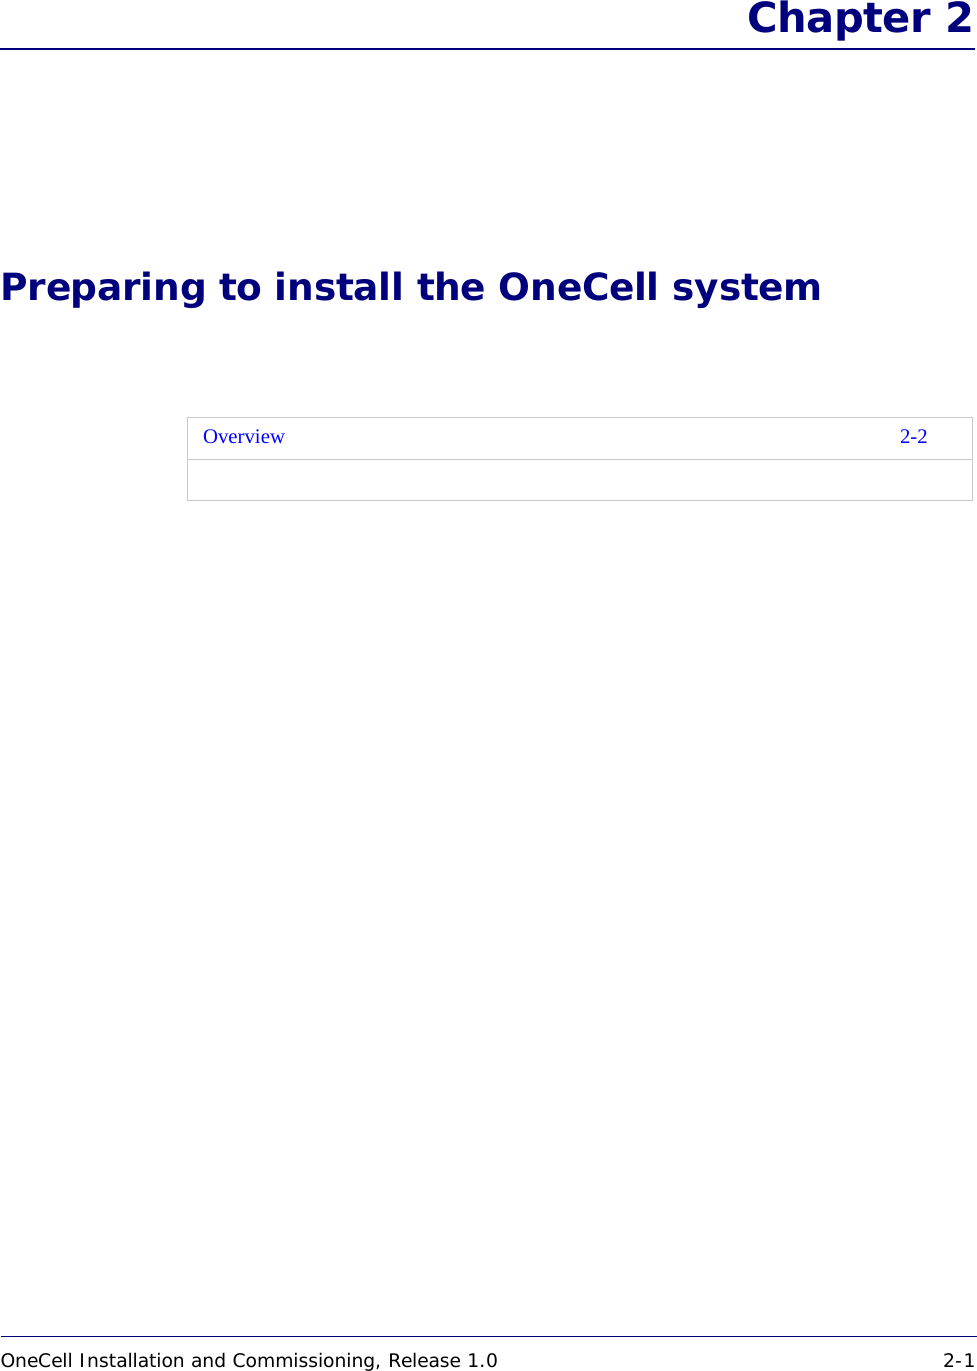 OneCell Installation and Commissioning, Release 1.0 2-1DRAFT Chapter 2Preparing to install the OneCell systemOverview 2-2